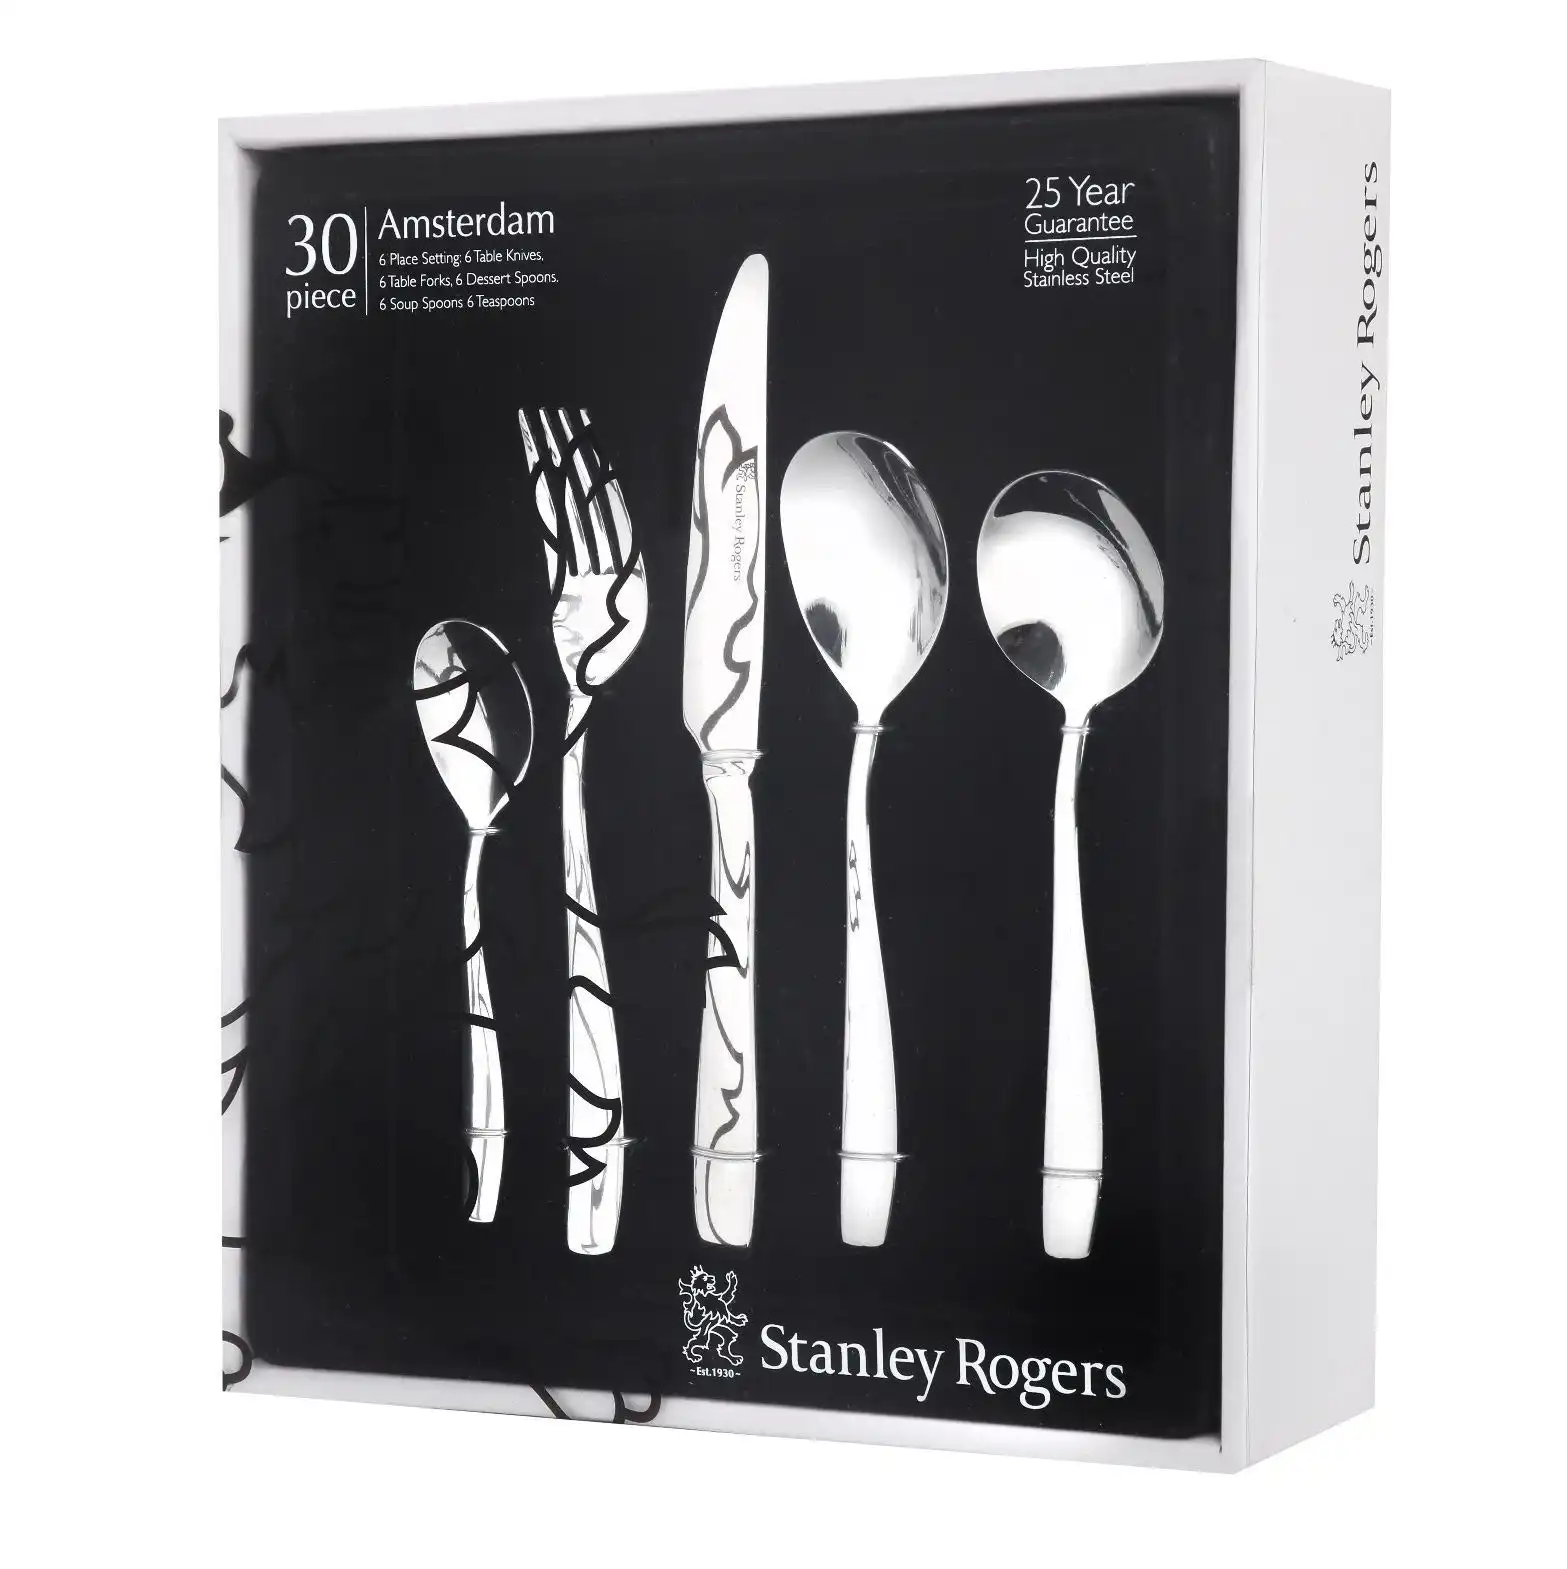 Stanley Rogers 30 Piece Amsterdam Cutlery Gift Boxed Set